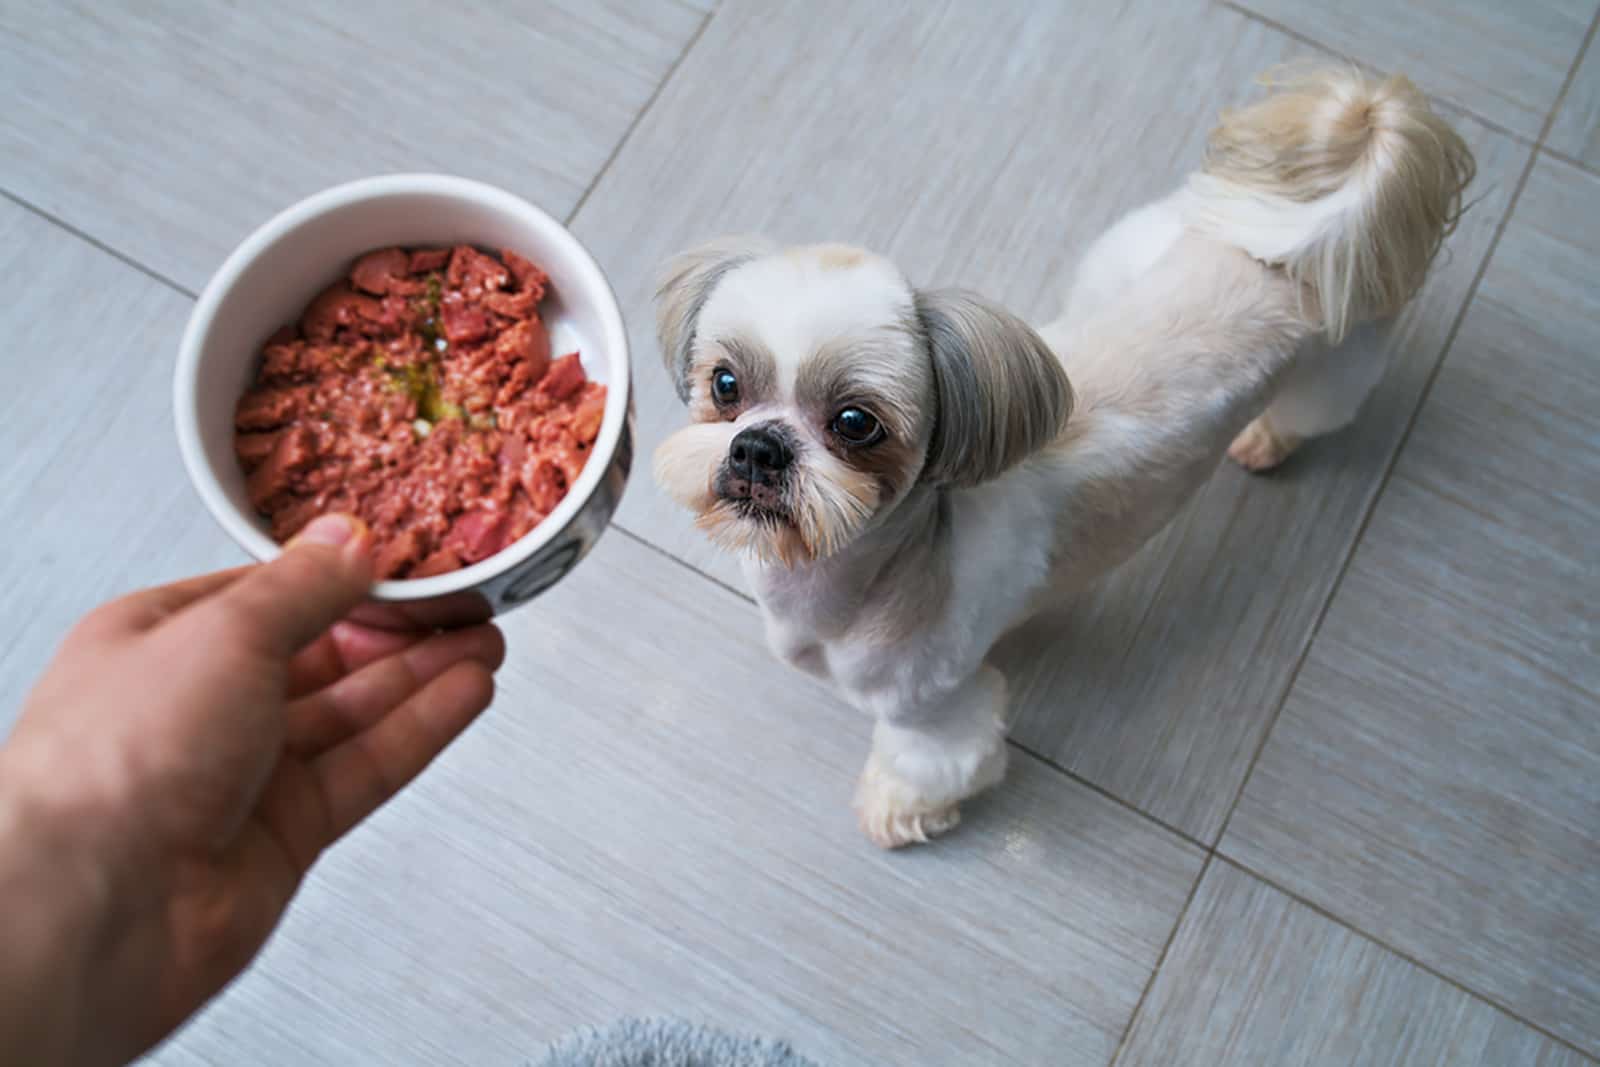 shih tzu dog getting food from owner